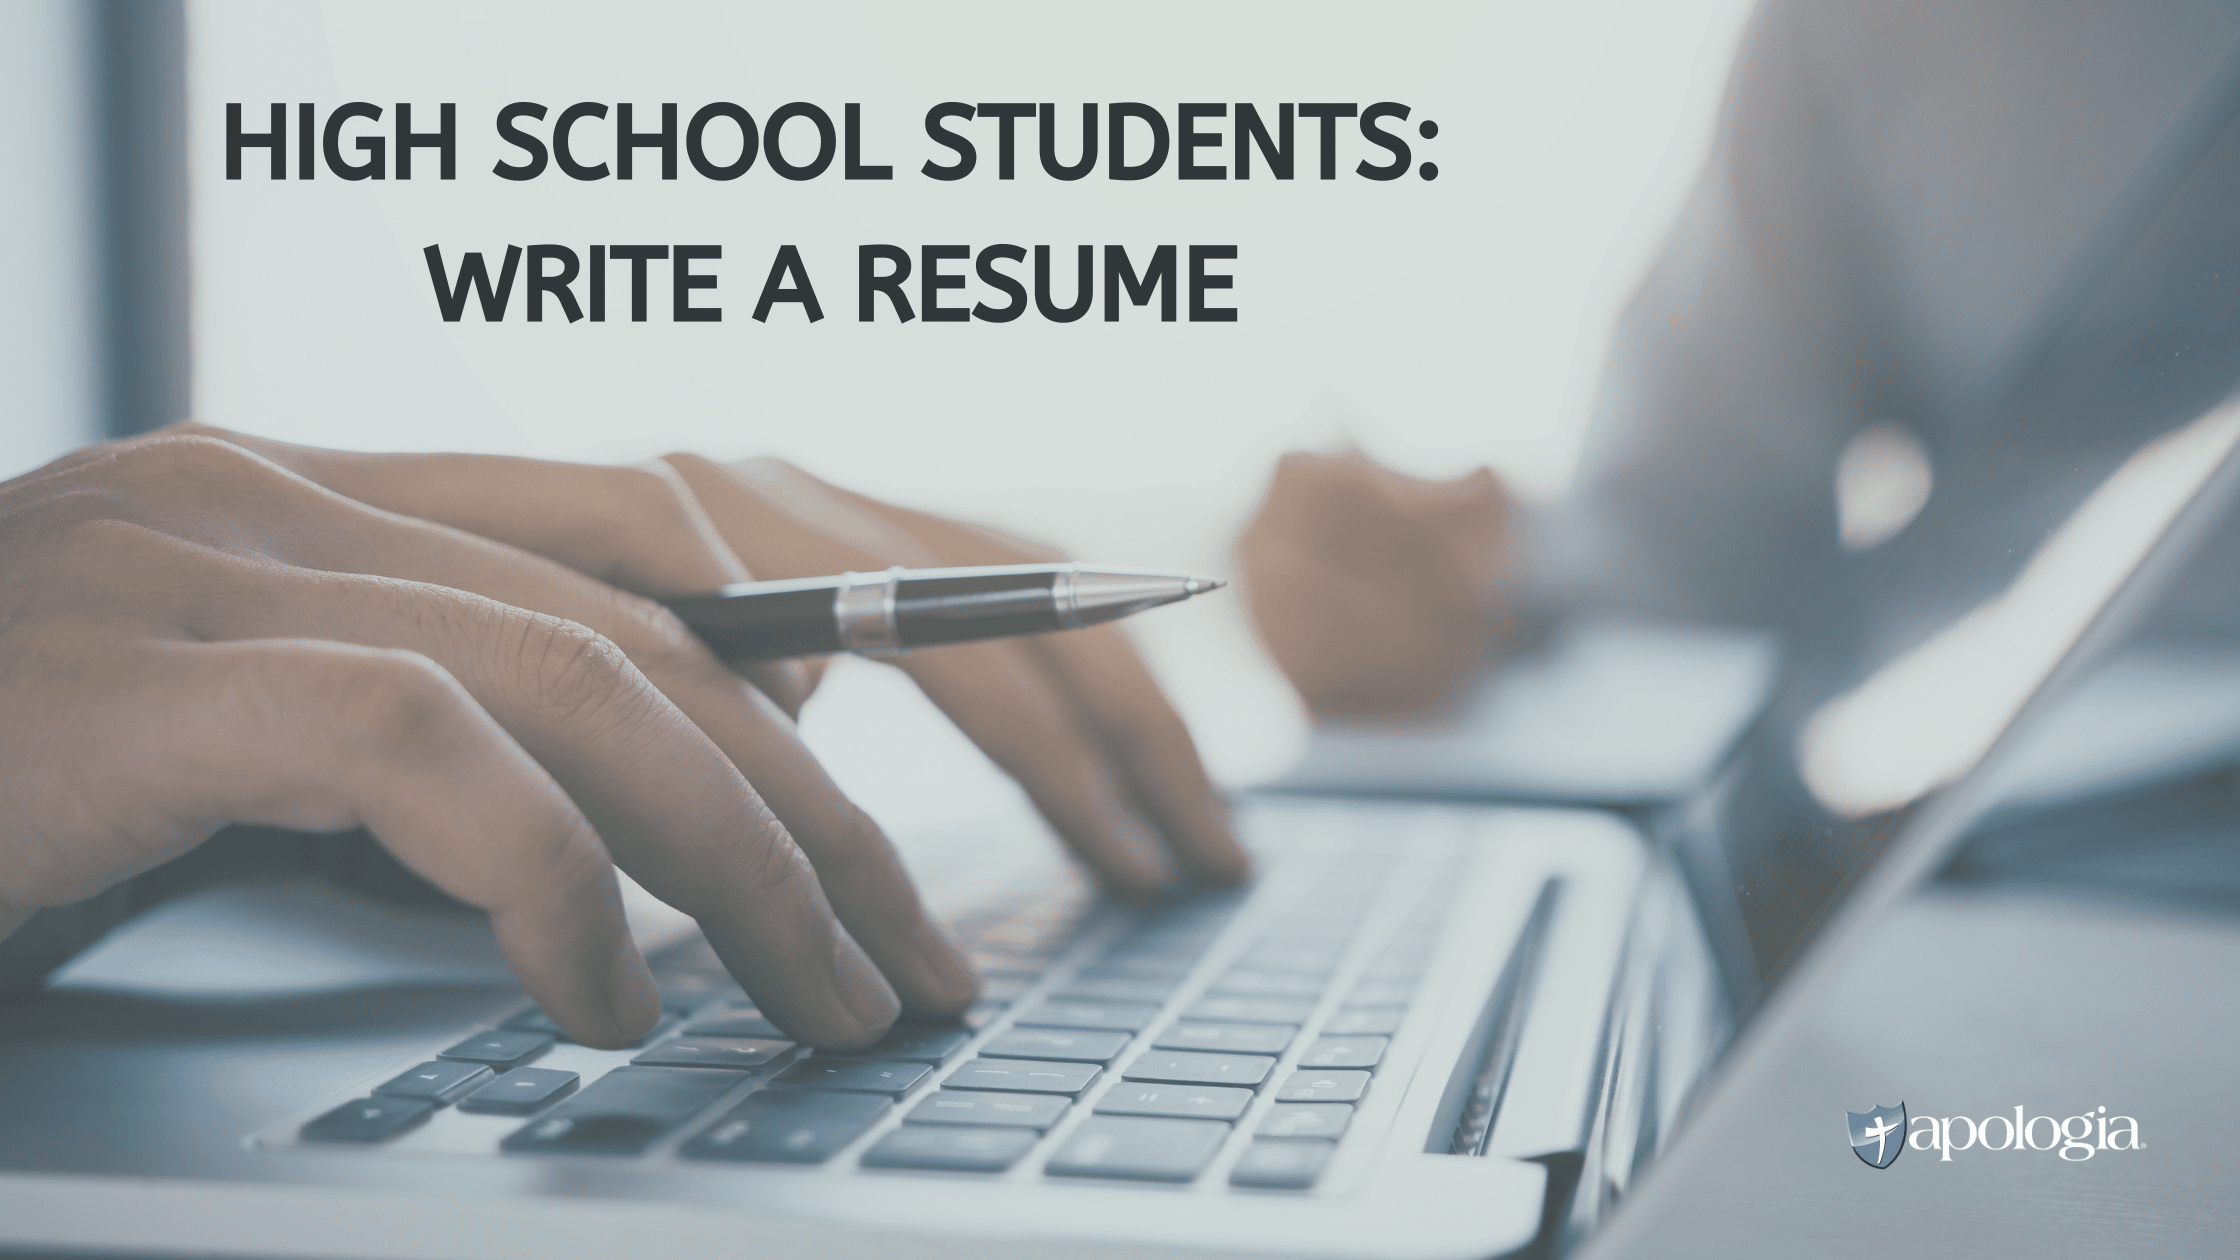 High School Students: Write a Resume